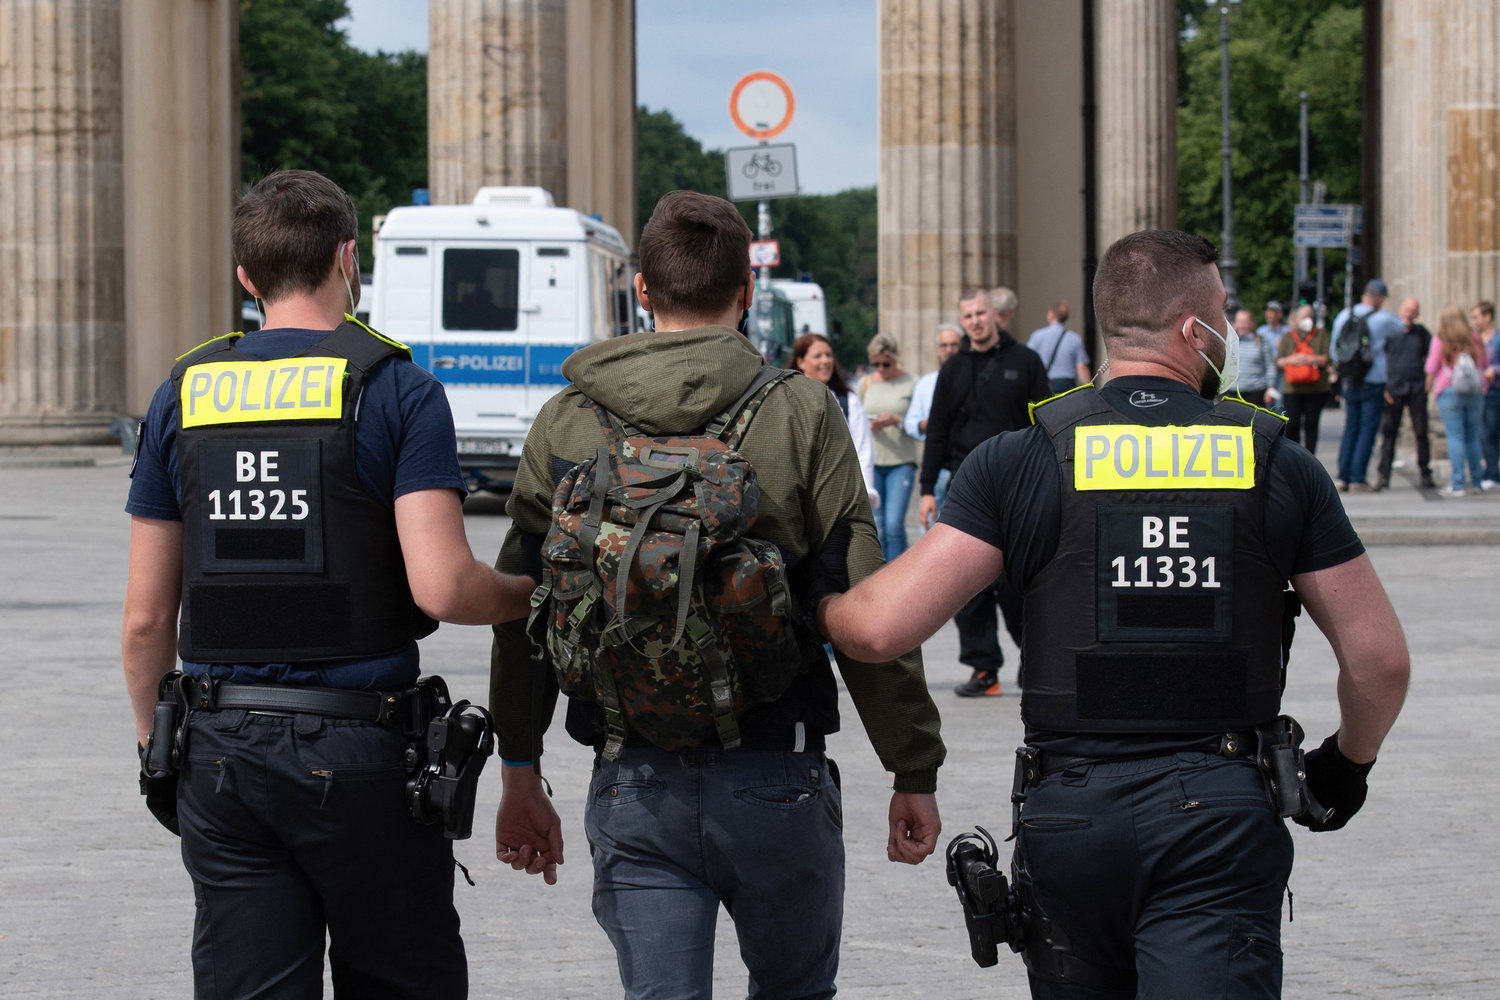 German police arrest a participant of an anti-lockdown protest in front of the Brandenburg Gate in Berlin on August 1, 2021. Berlin police clashed with COVID-19 skeptics after hundreds of them took to the streets despite a court-ordered protest ban. (Paul Zinken/AFP/Getty Images/TNS)